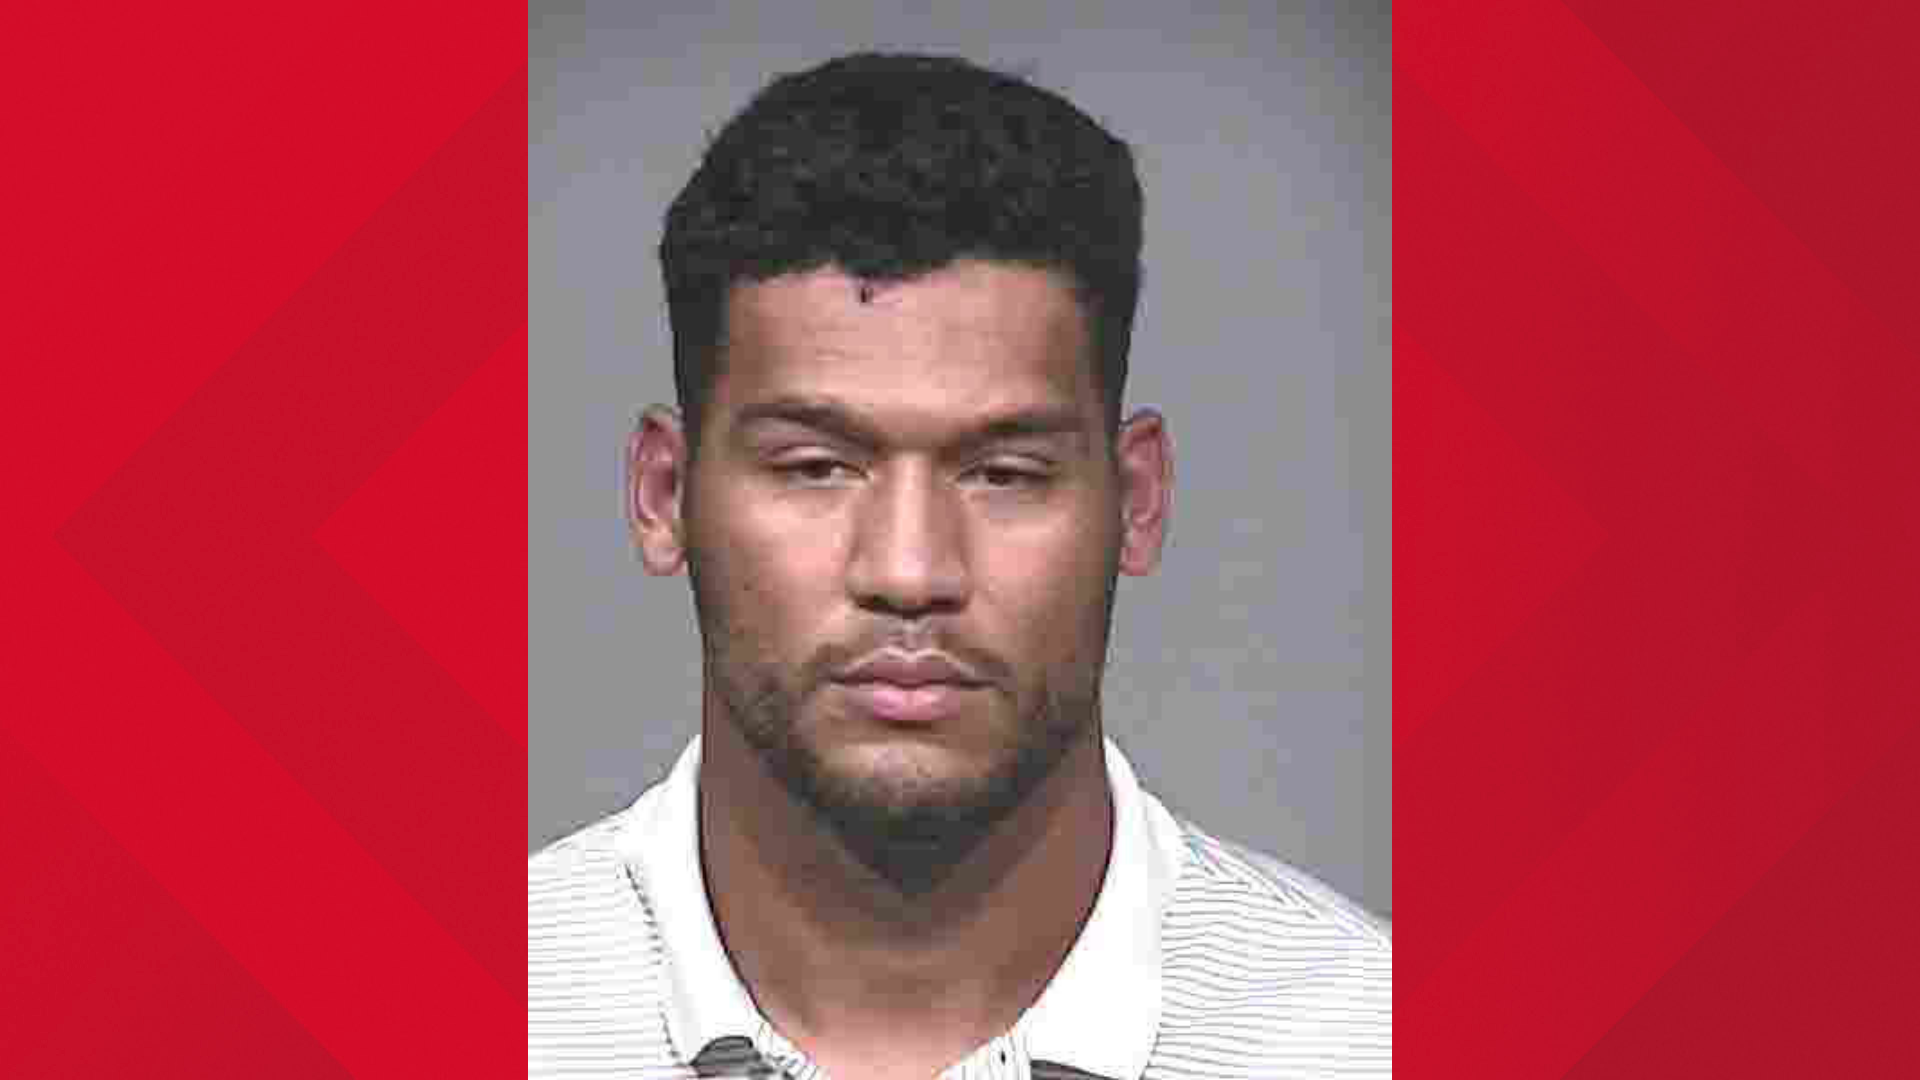 Zaven Collins, the Cardinals' first-round draft pick in 2021, was arrested Sunday for excessive speed and reckless driving, according to Scottsdale police.